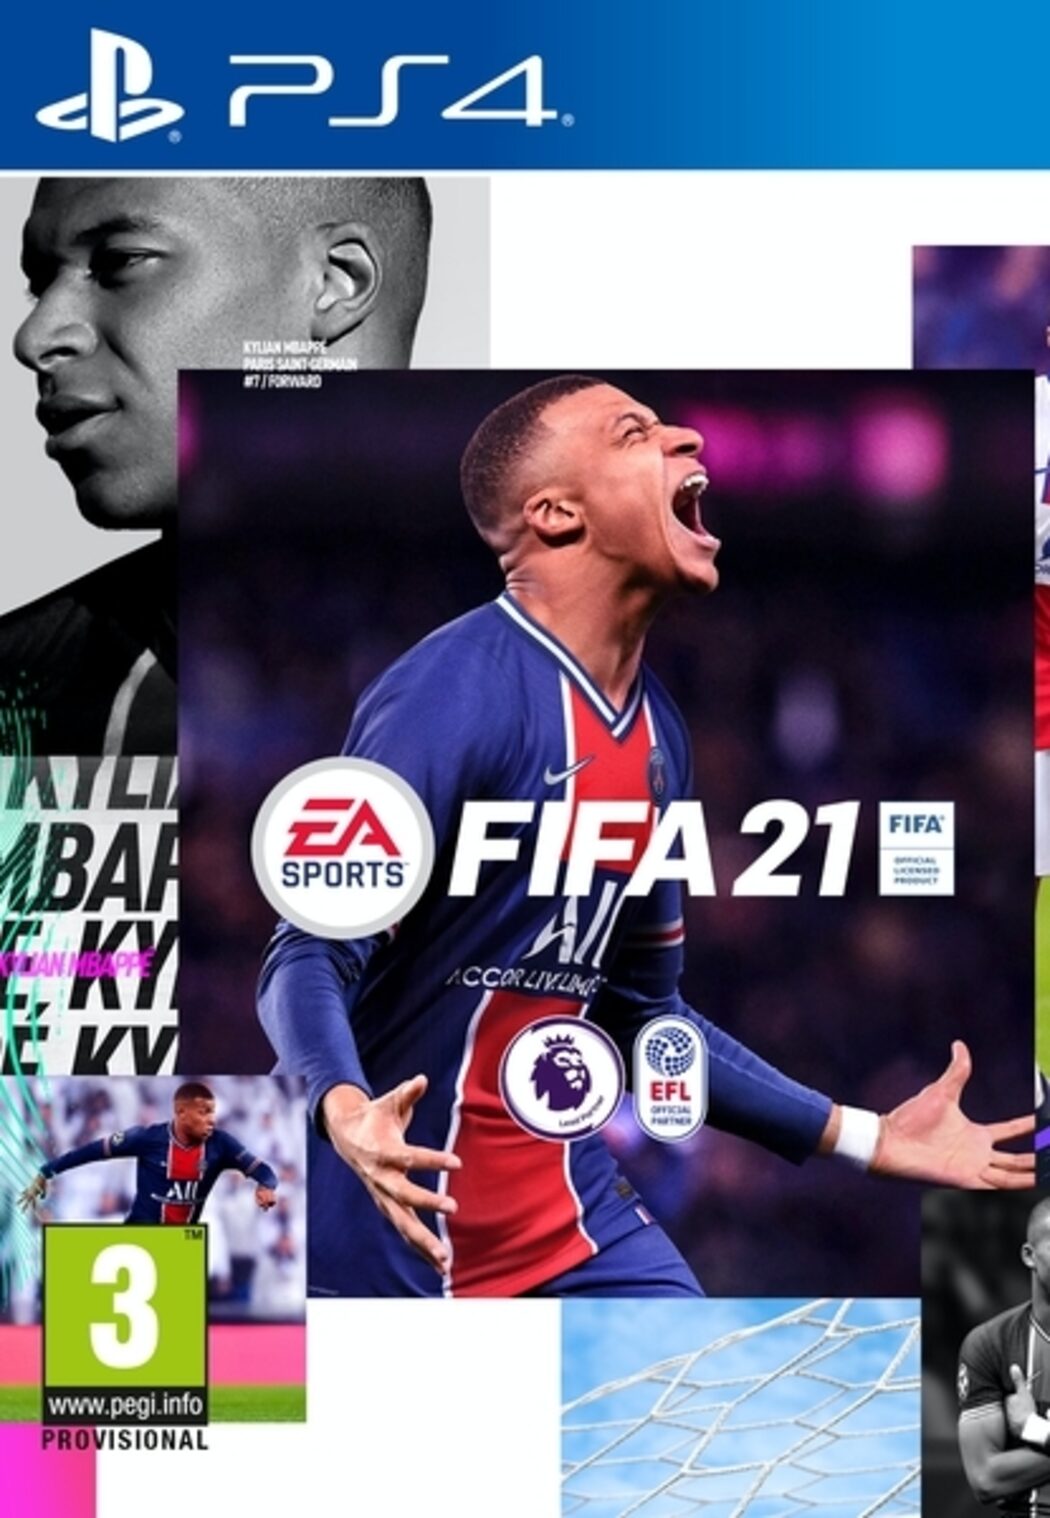 fifa 20 ps4 store us